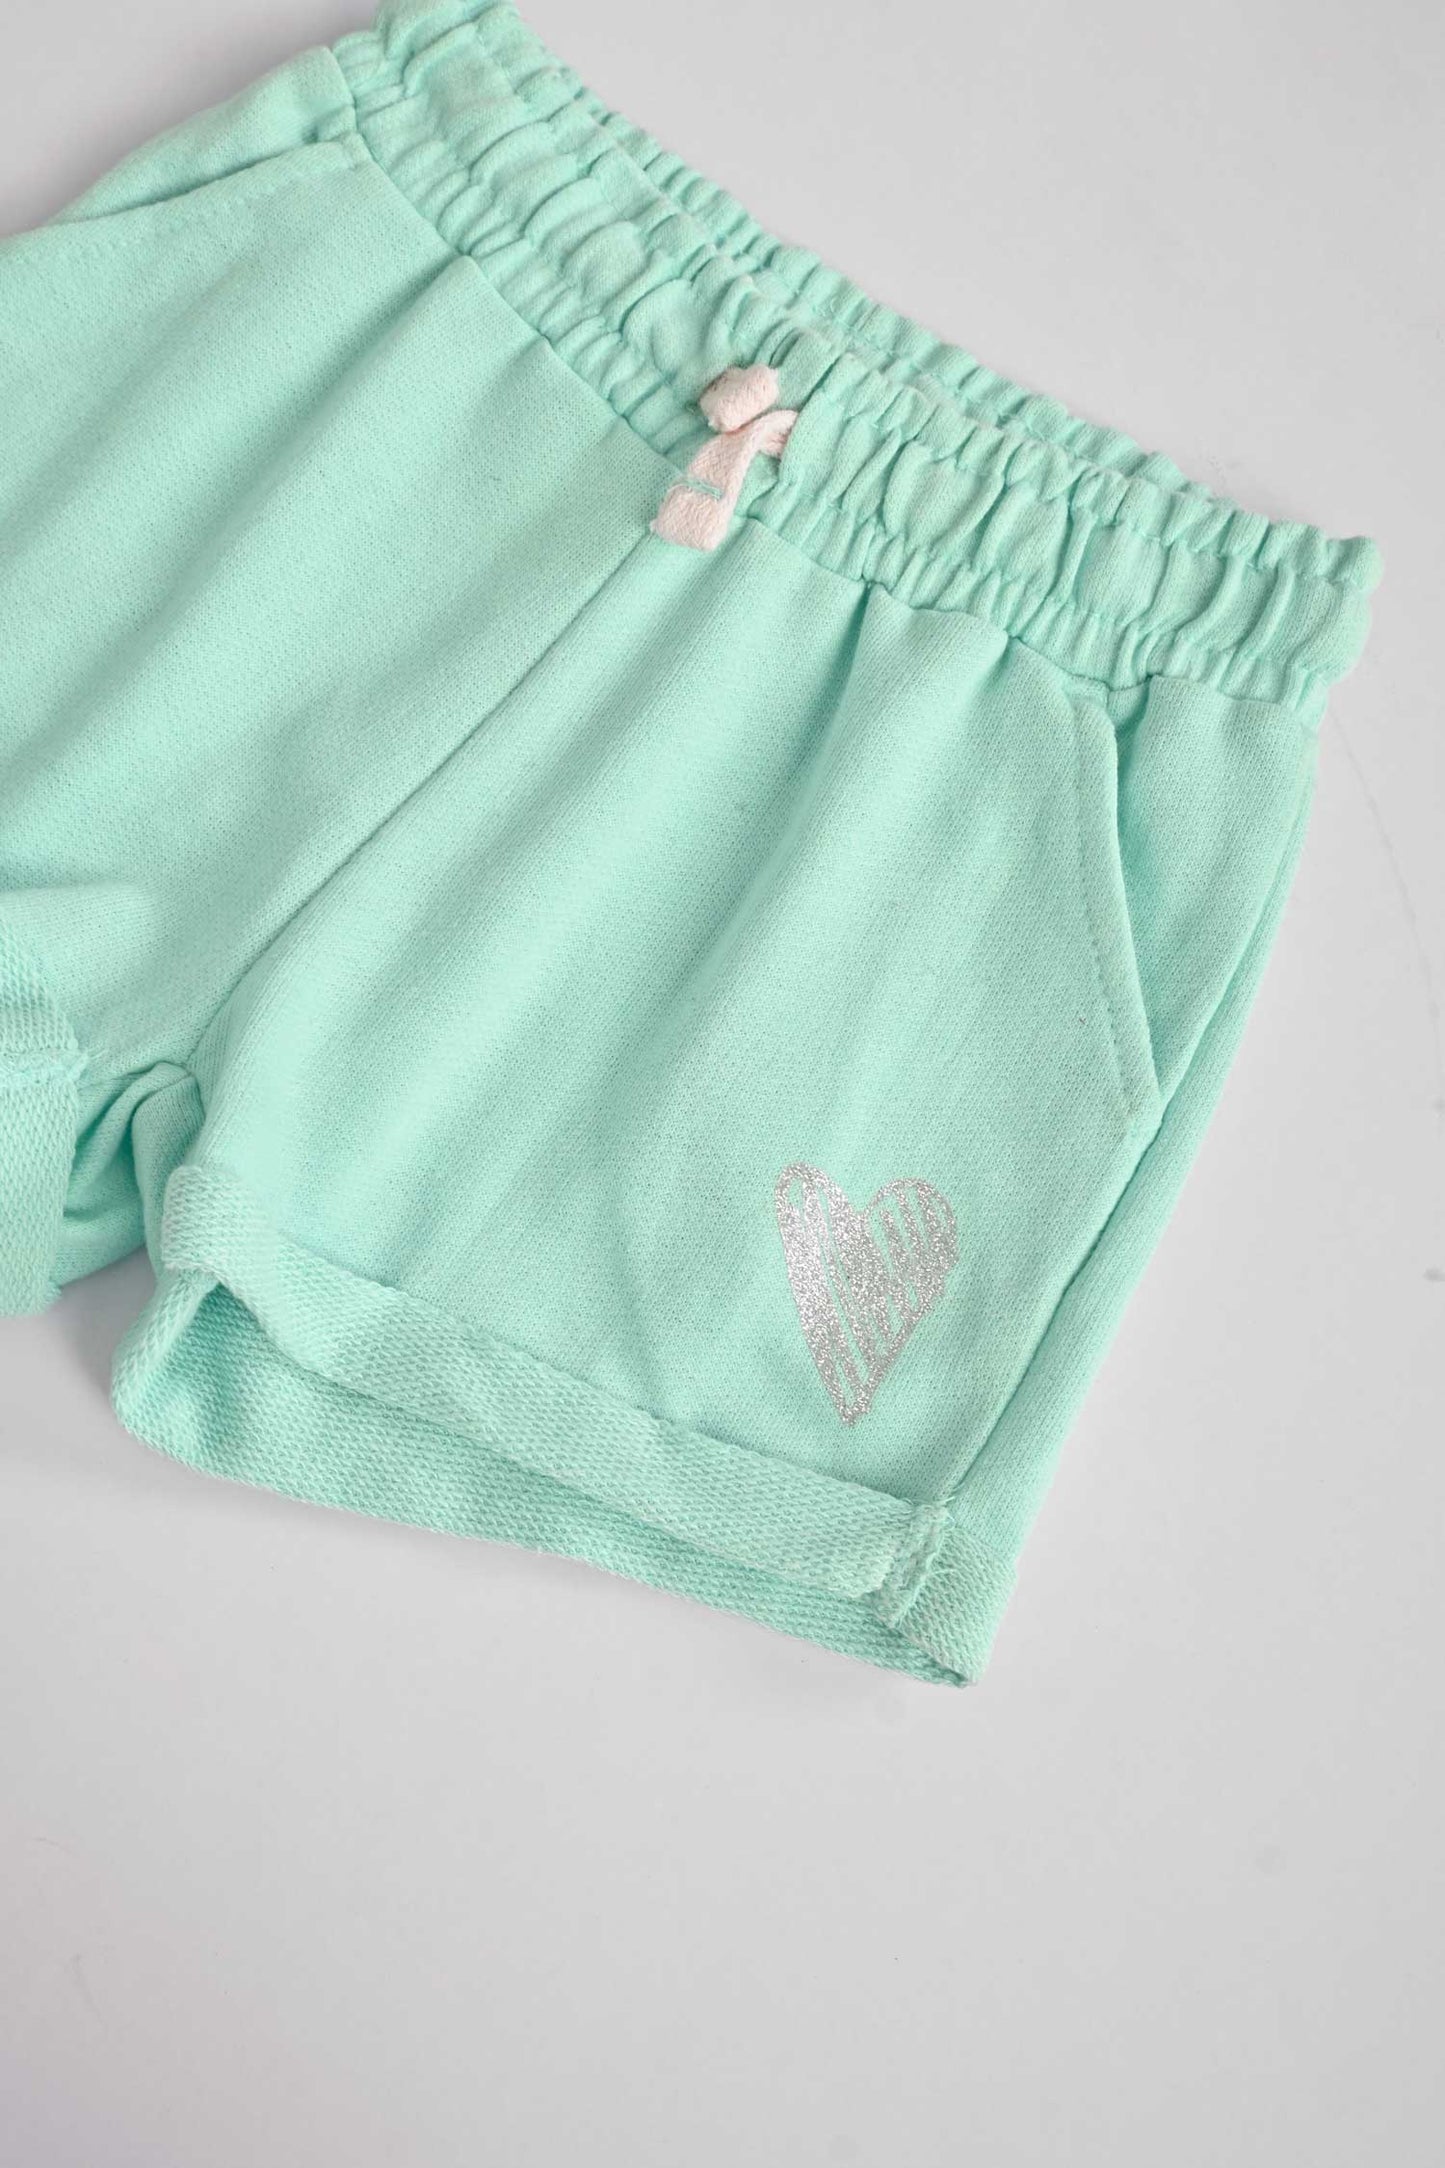 Tessential Kid's Glitter Heart Printed Terry Shorts